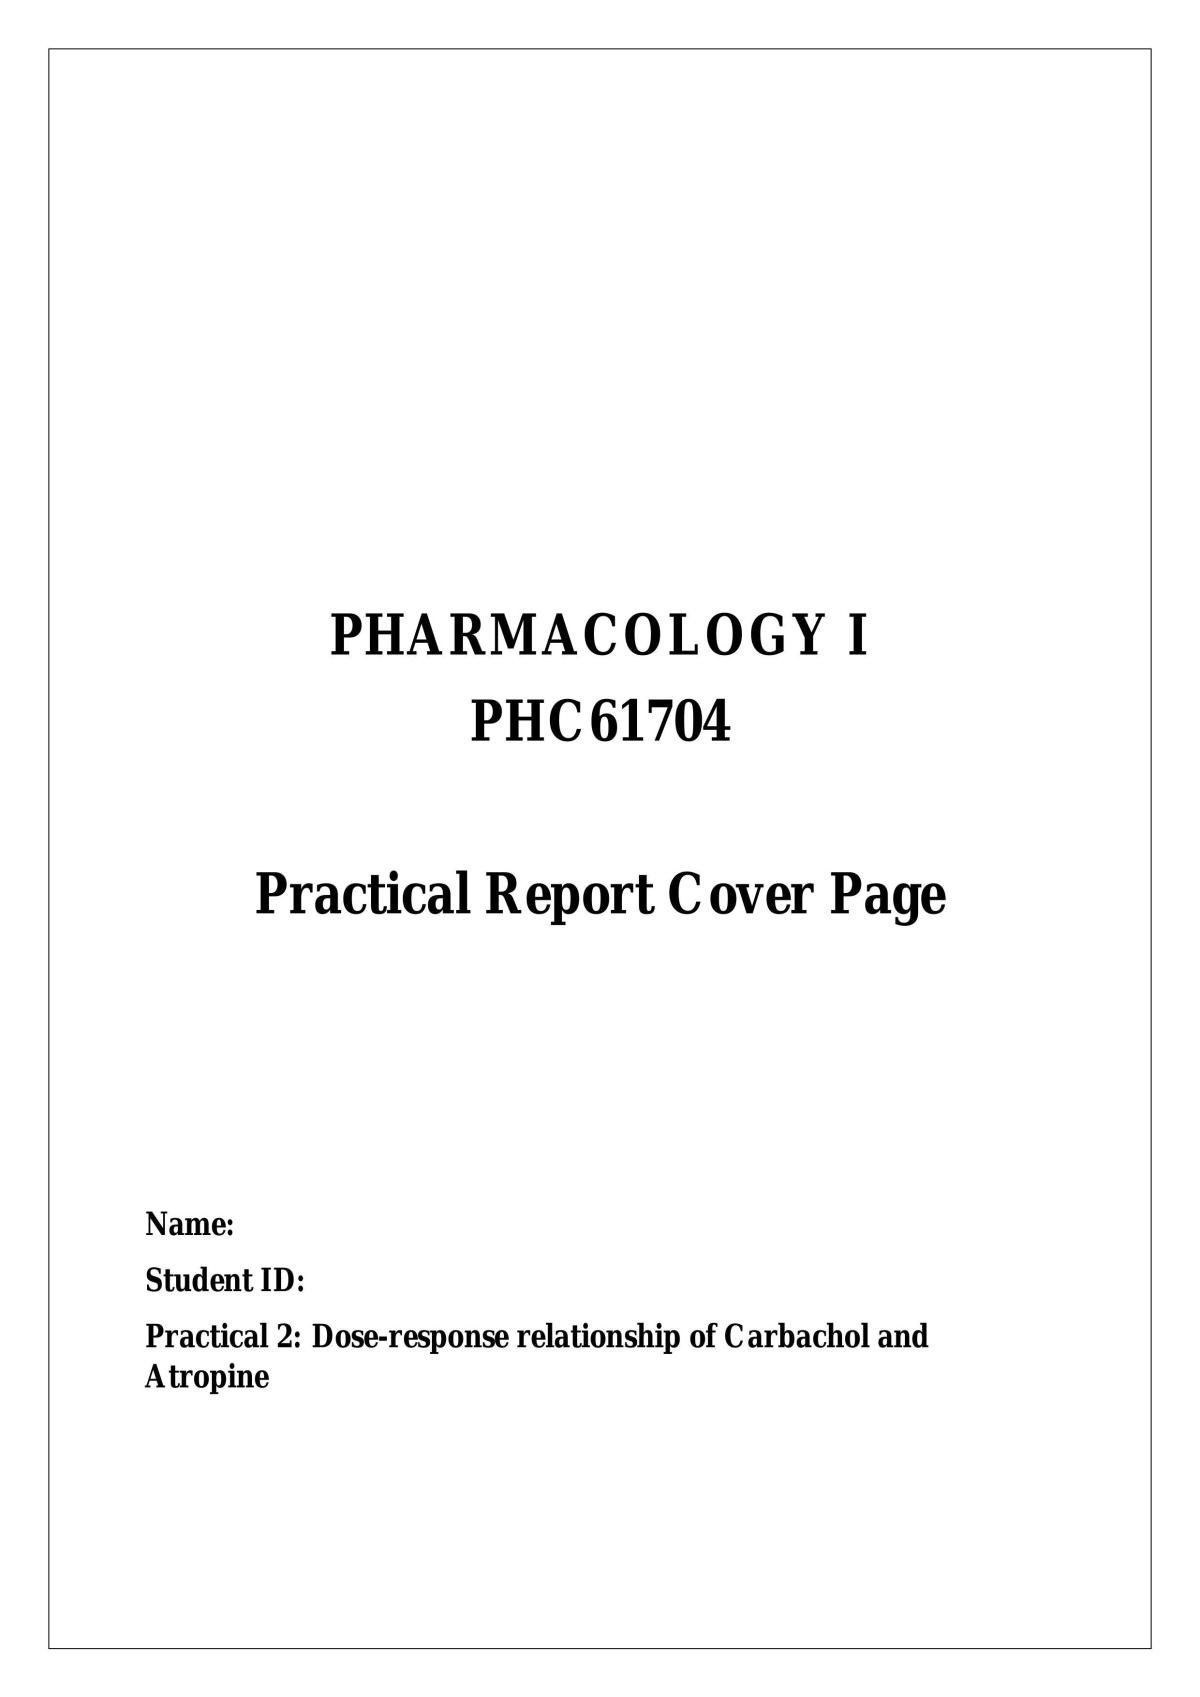 Practical 2: Dose-Response Relationship of Carbachol and Atropine - Page 1